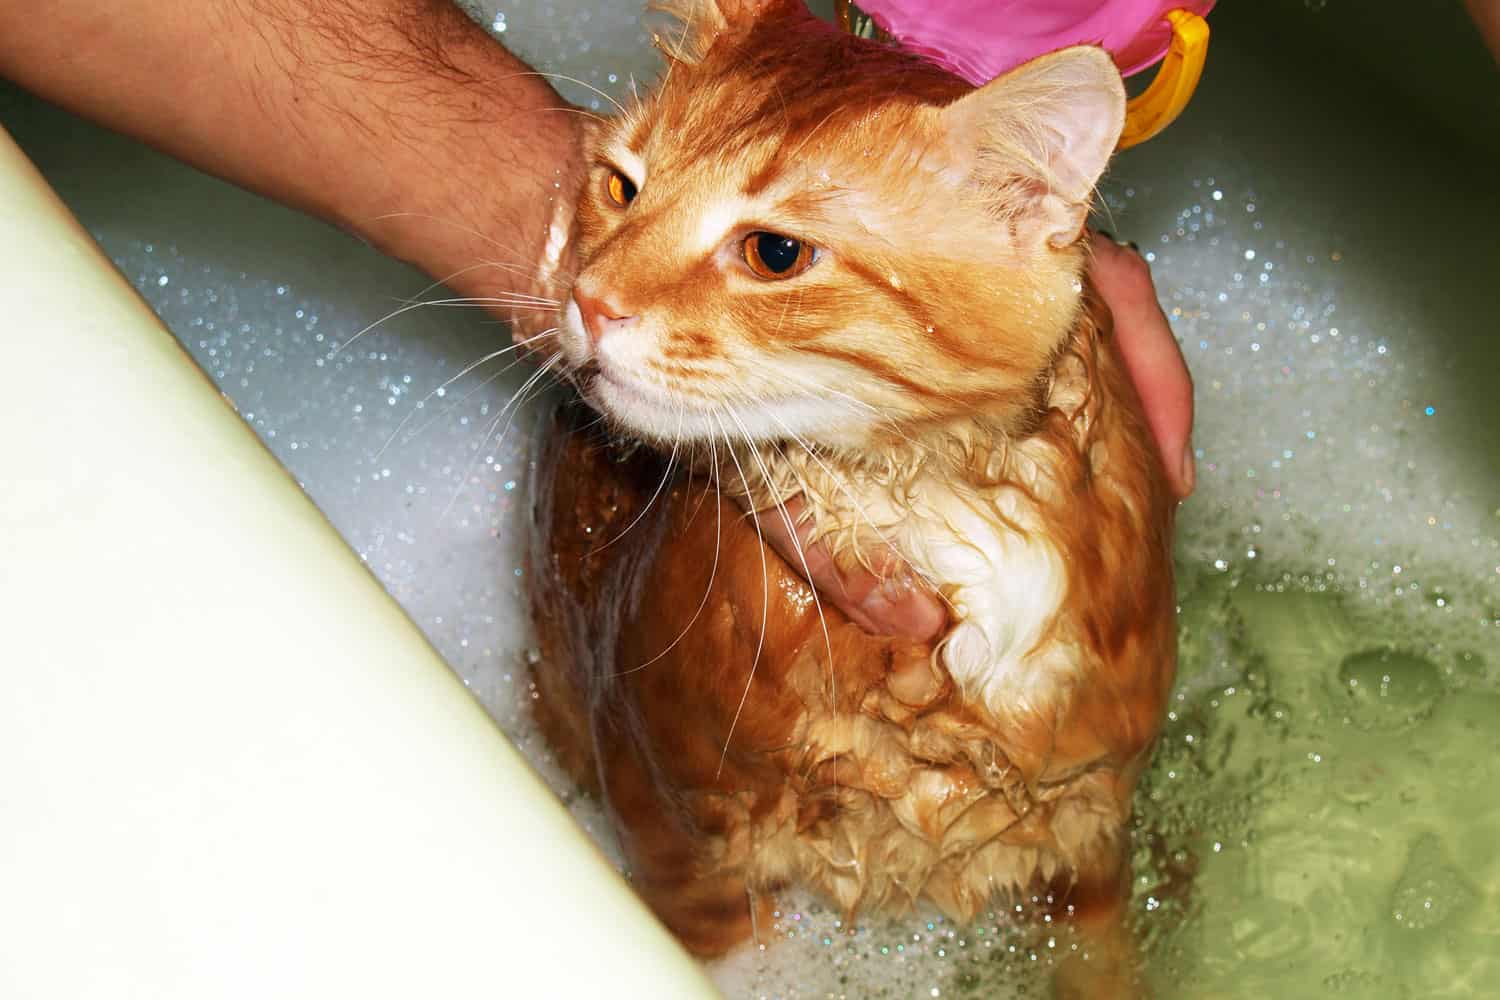 cat in the water,wash the cat in the bathroom
